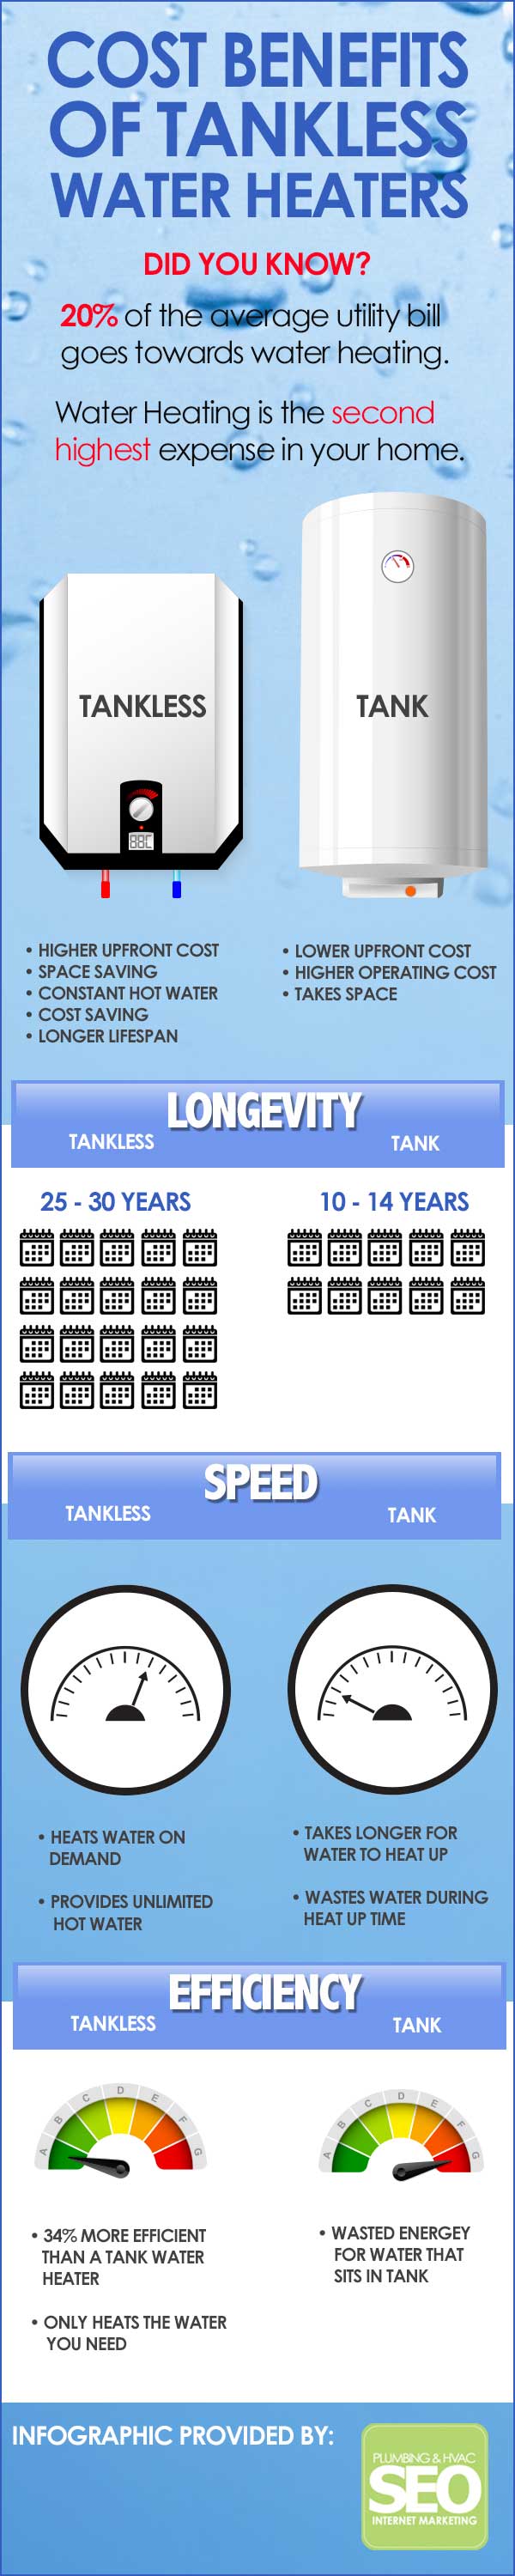 The Cost Benefits Of Tankless Water Heaters Infographic